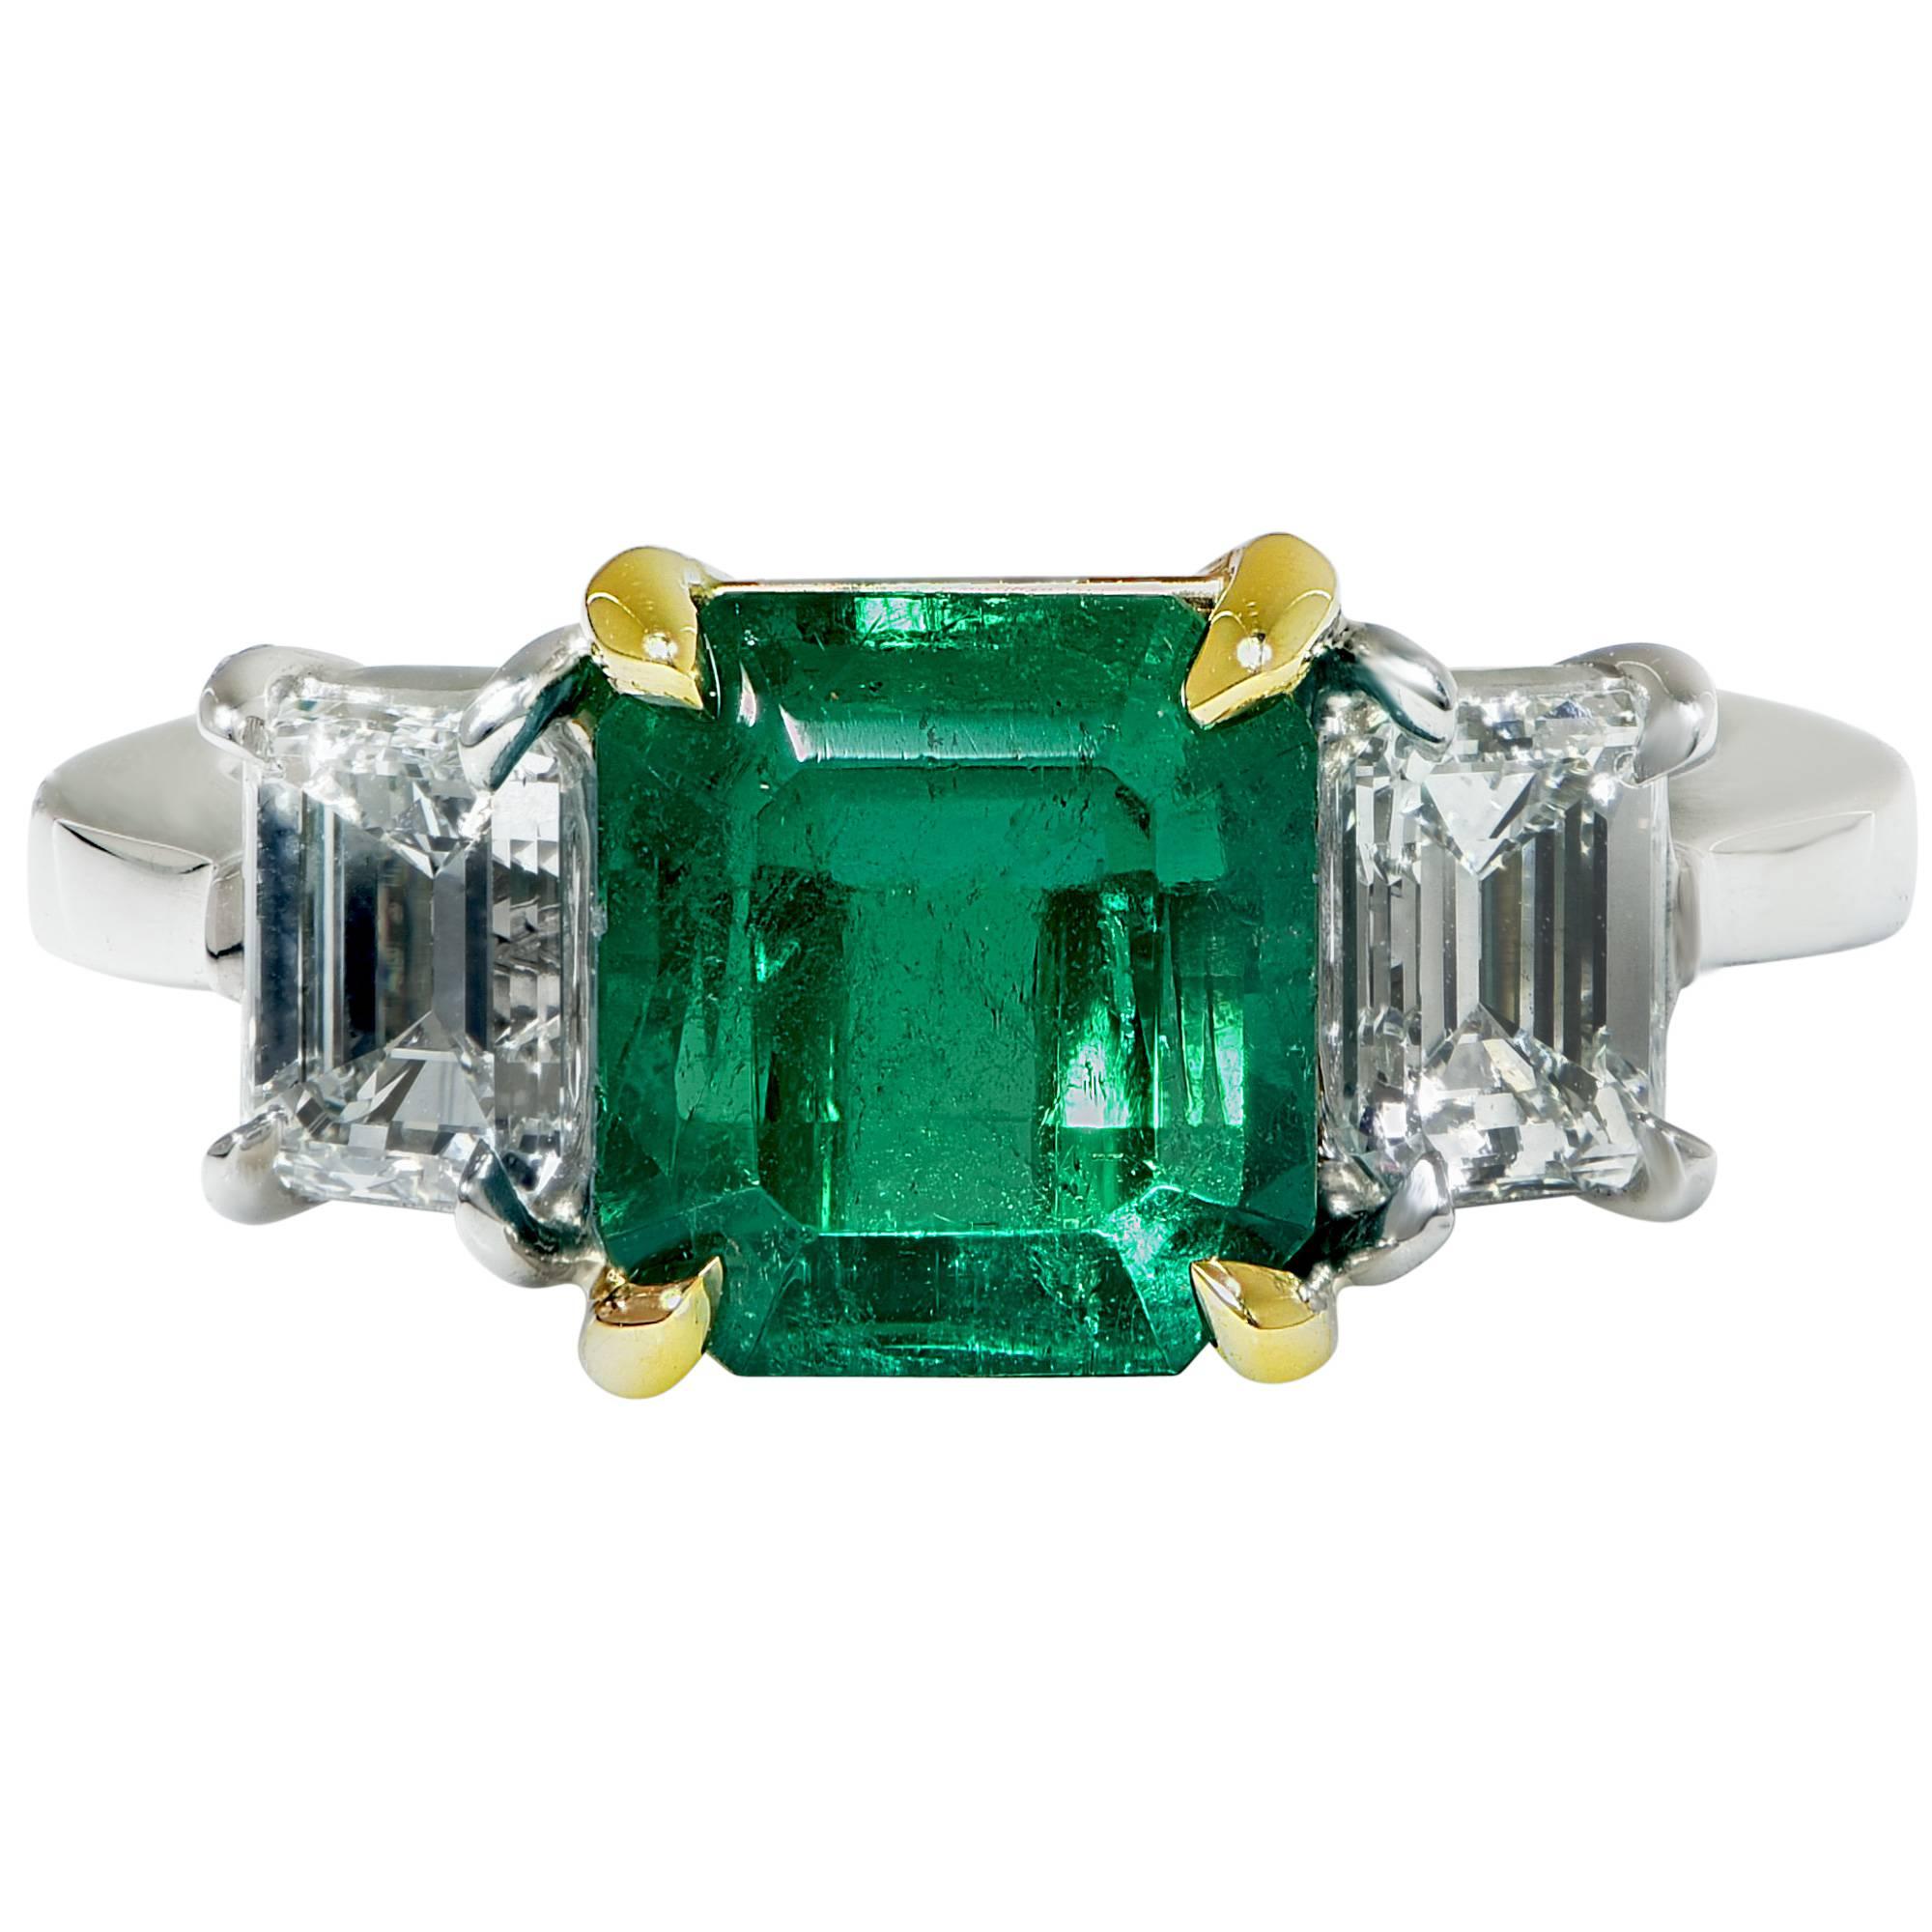 This gorgeous platinum and 18k yellow gold three stone ring features an AGL graded 2.66ct Colombian emerald and is accented by two emerald cut diamonds weighing 1.23ct total, G-H color, VS-SI clarity.

The ring size is currently 6 but can be sized